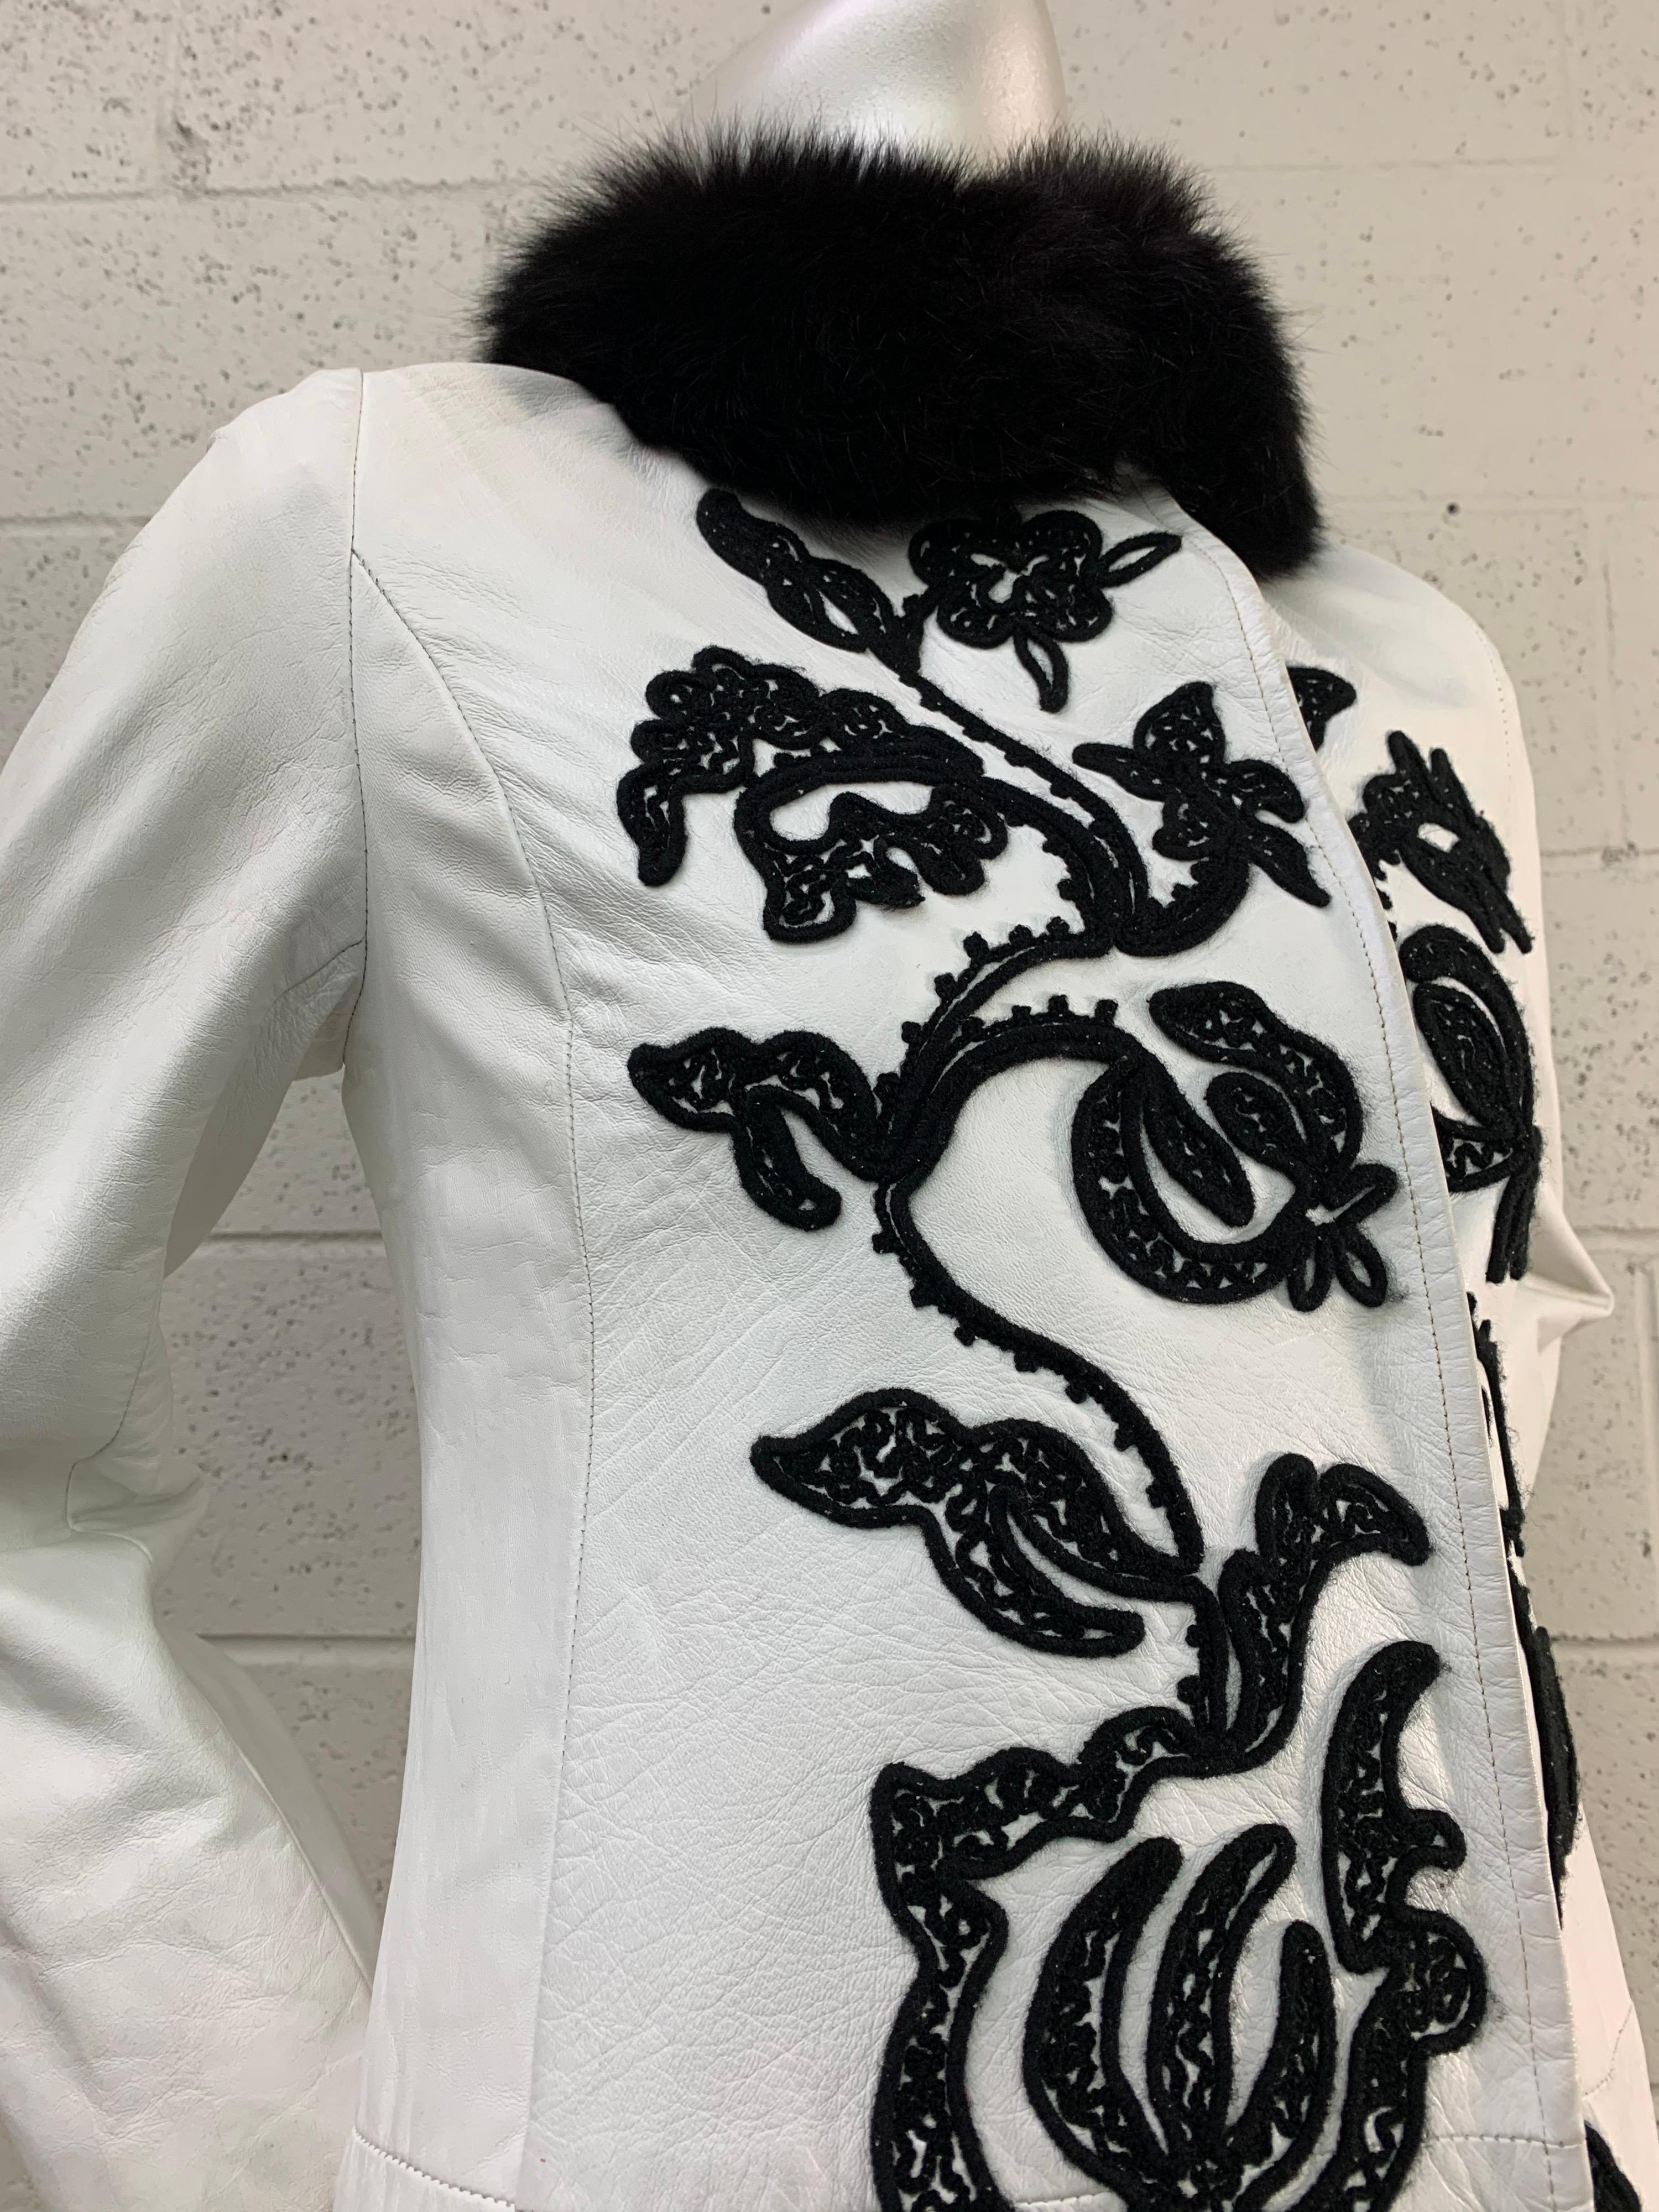 Gray 1960s White Leather Princess Coat w/ Black Crewel Embroidery and Fox Trim